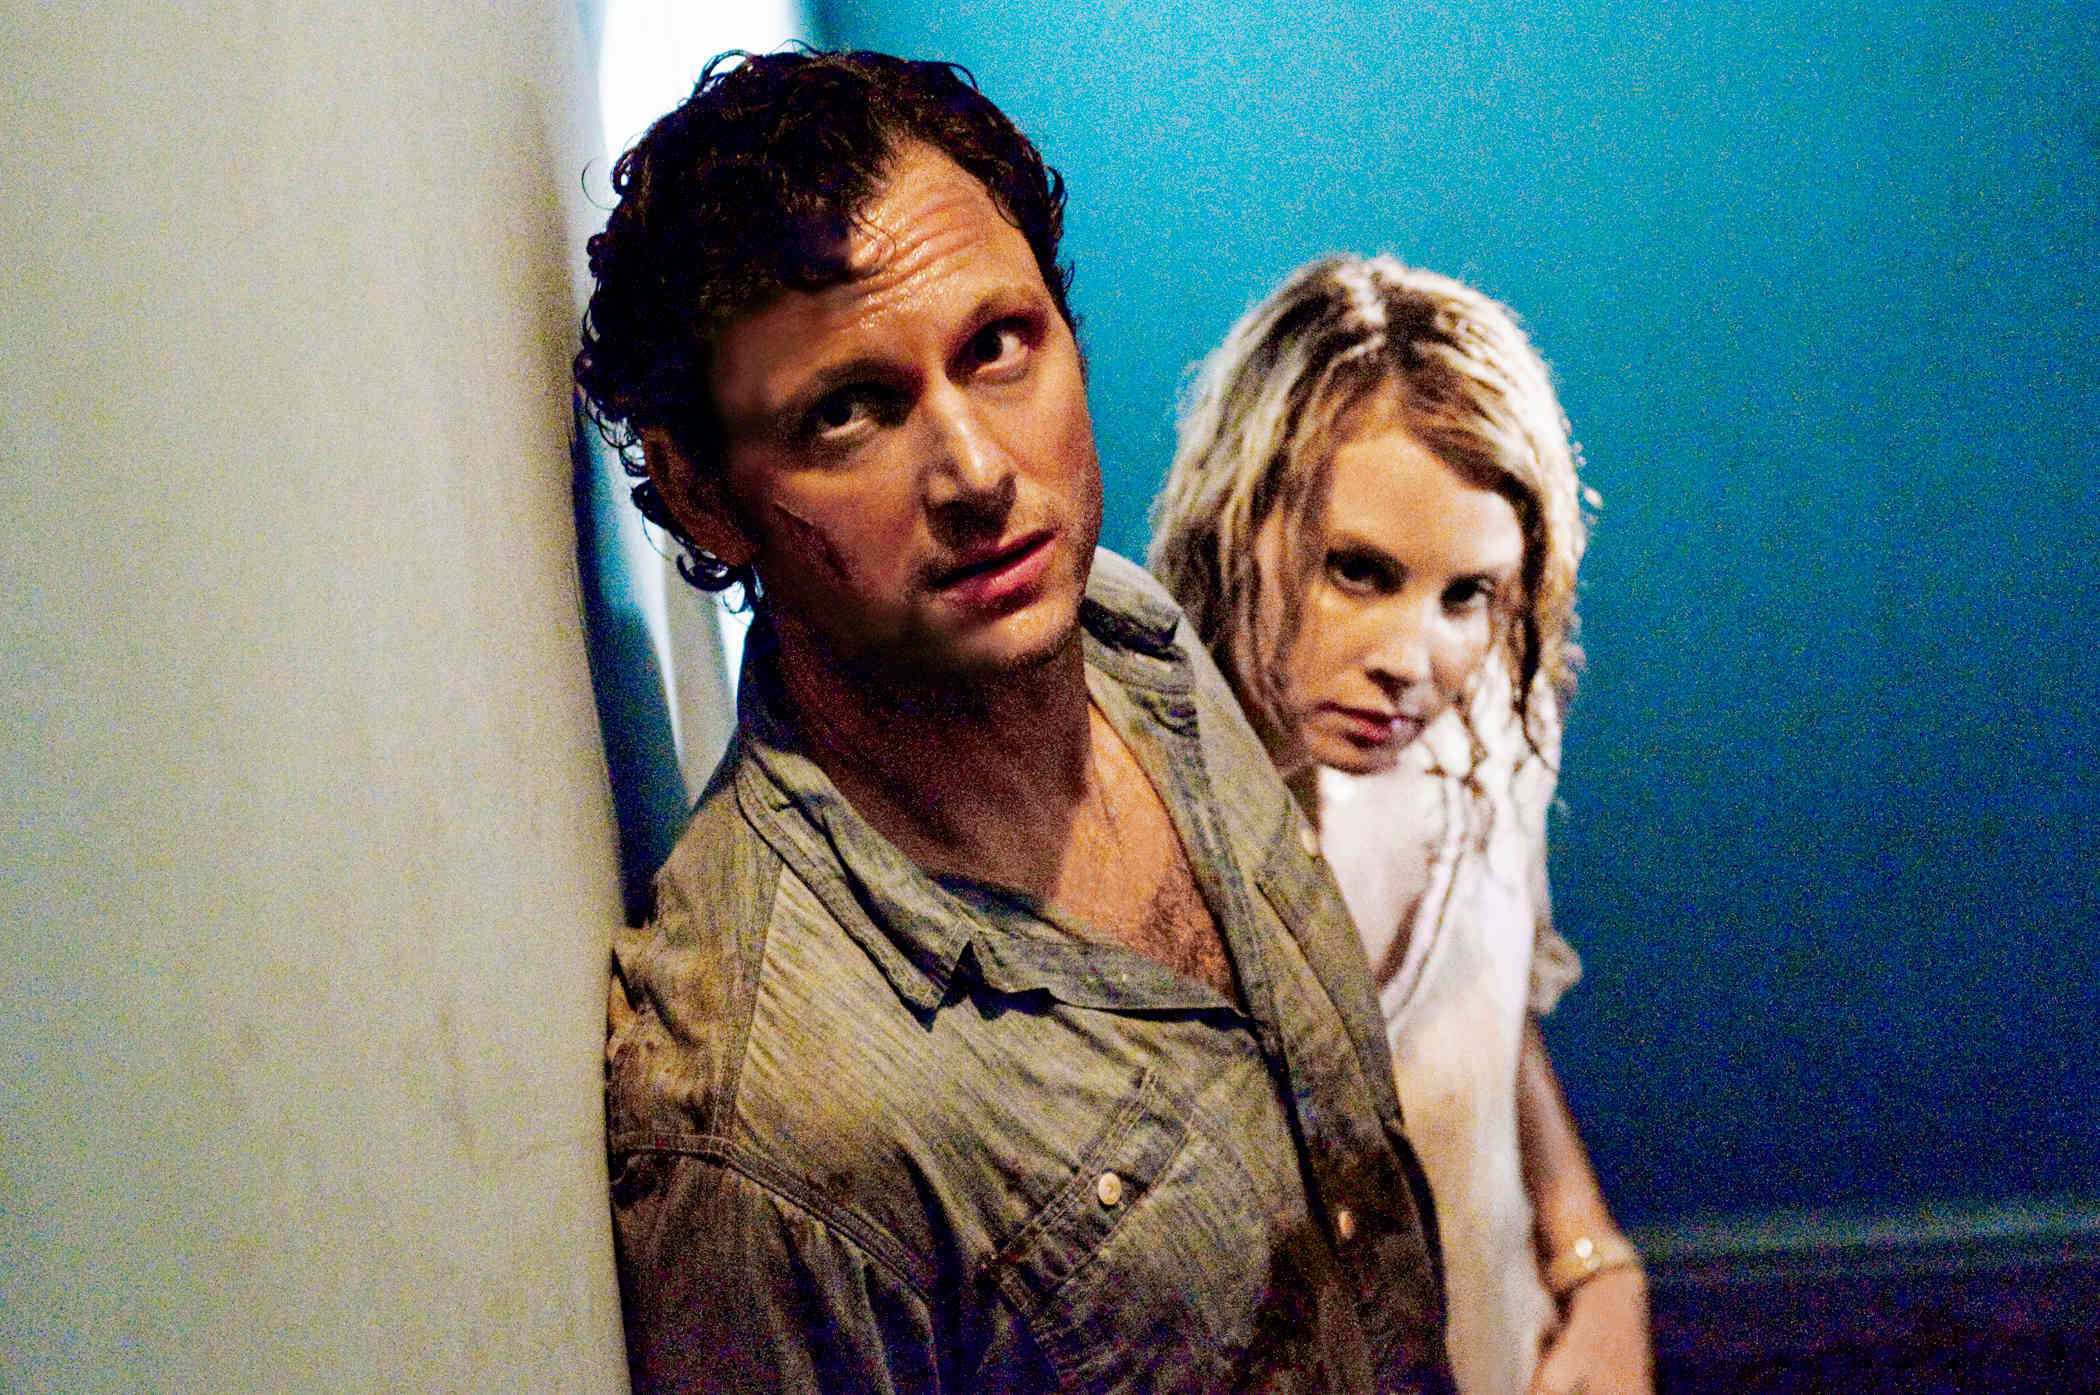 Tony Goldwyn stars as John Collingwood and Monica Potter stars as Emma Collingwood in Rogue Pictures' The Last House on the Left (2009)